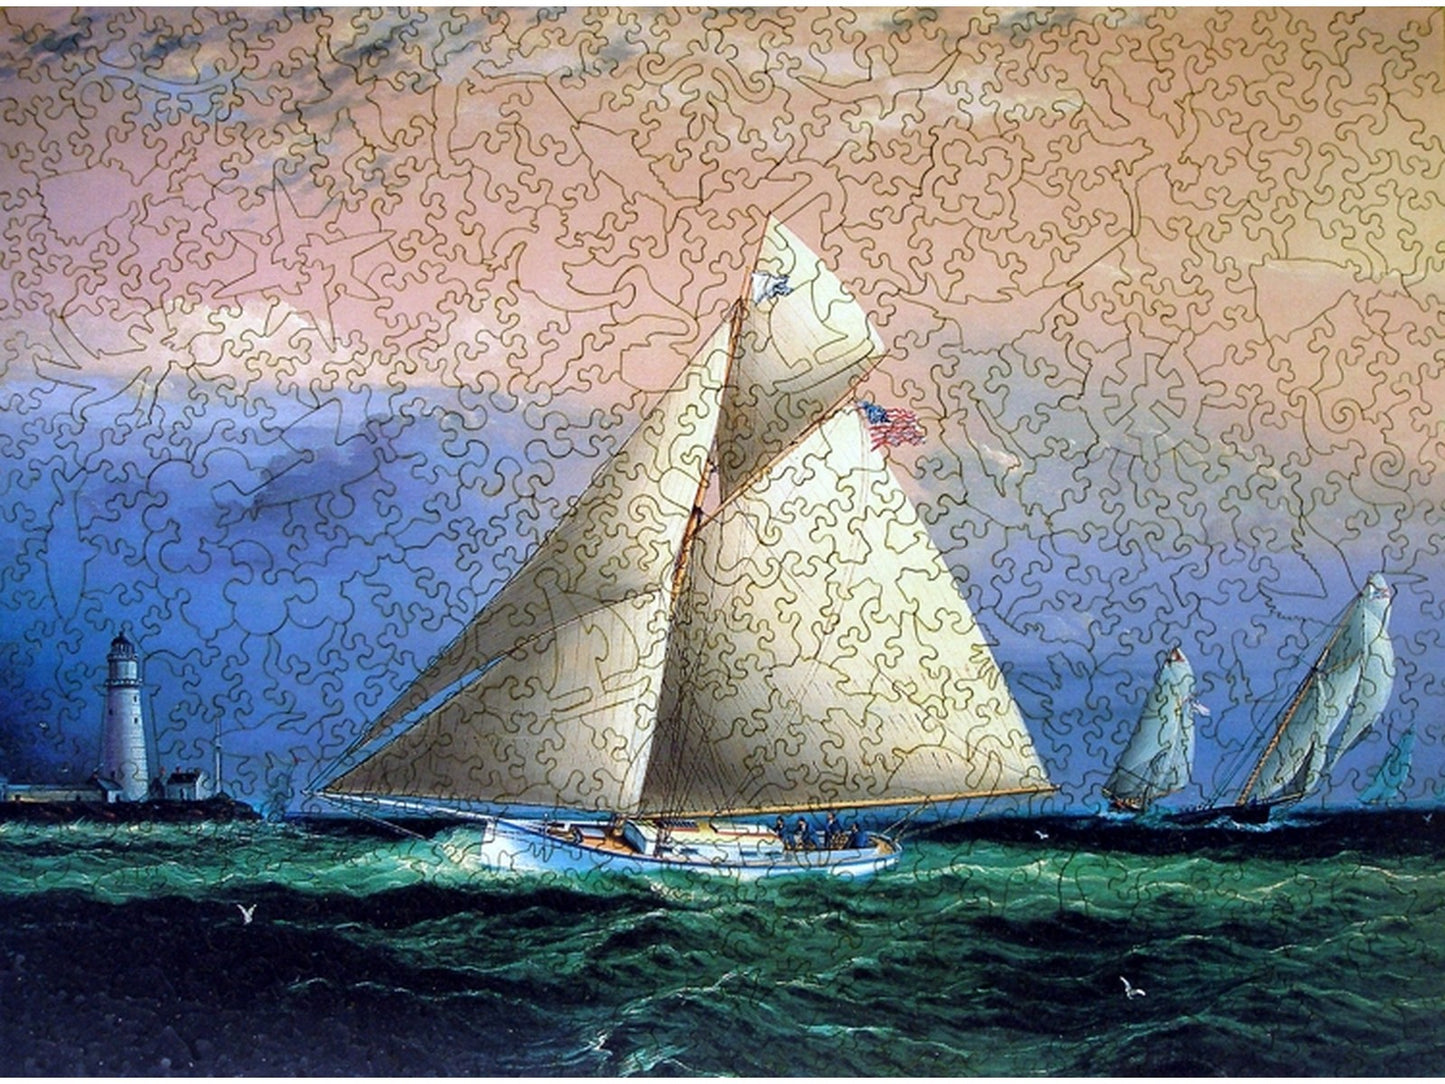 The front of the puzzle, Yacht Race Off Boston Light, which shows a sailboat going past a lighthouse.